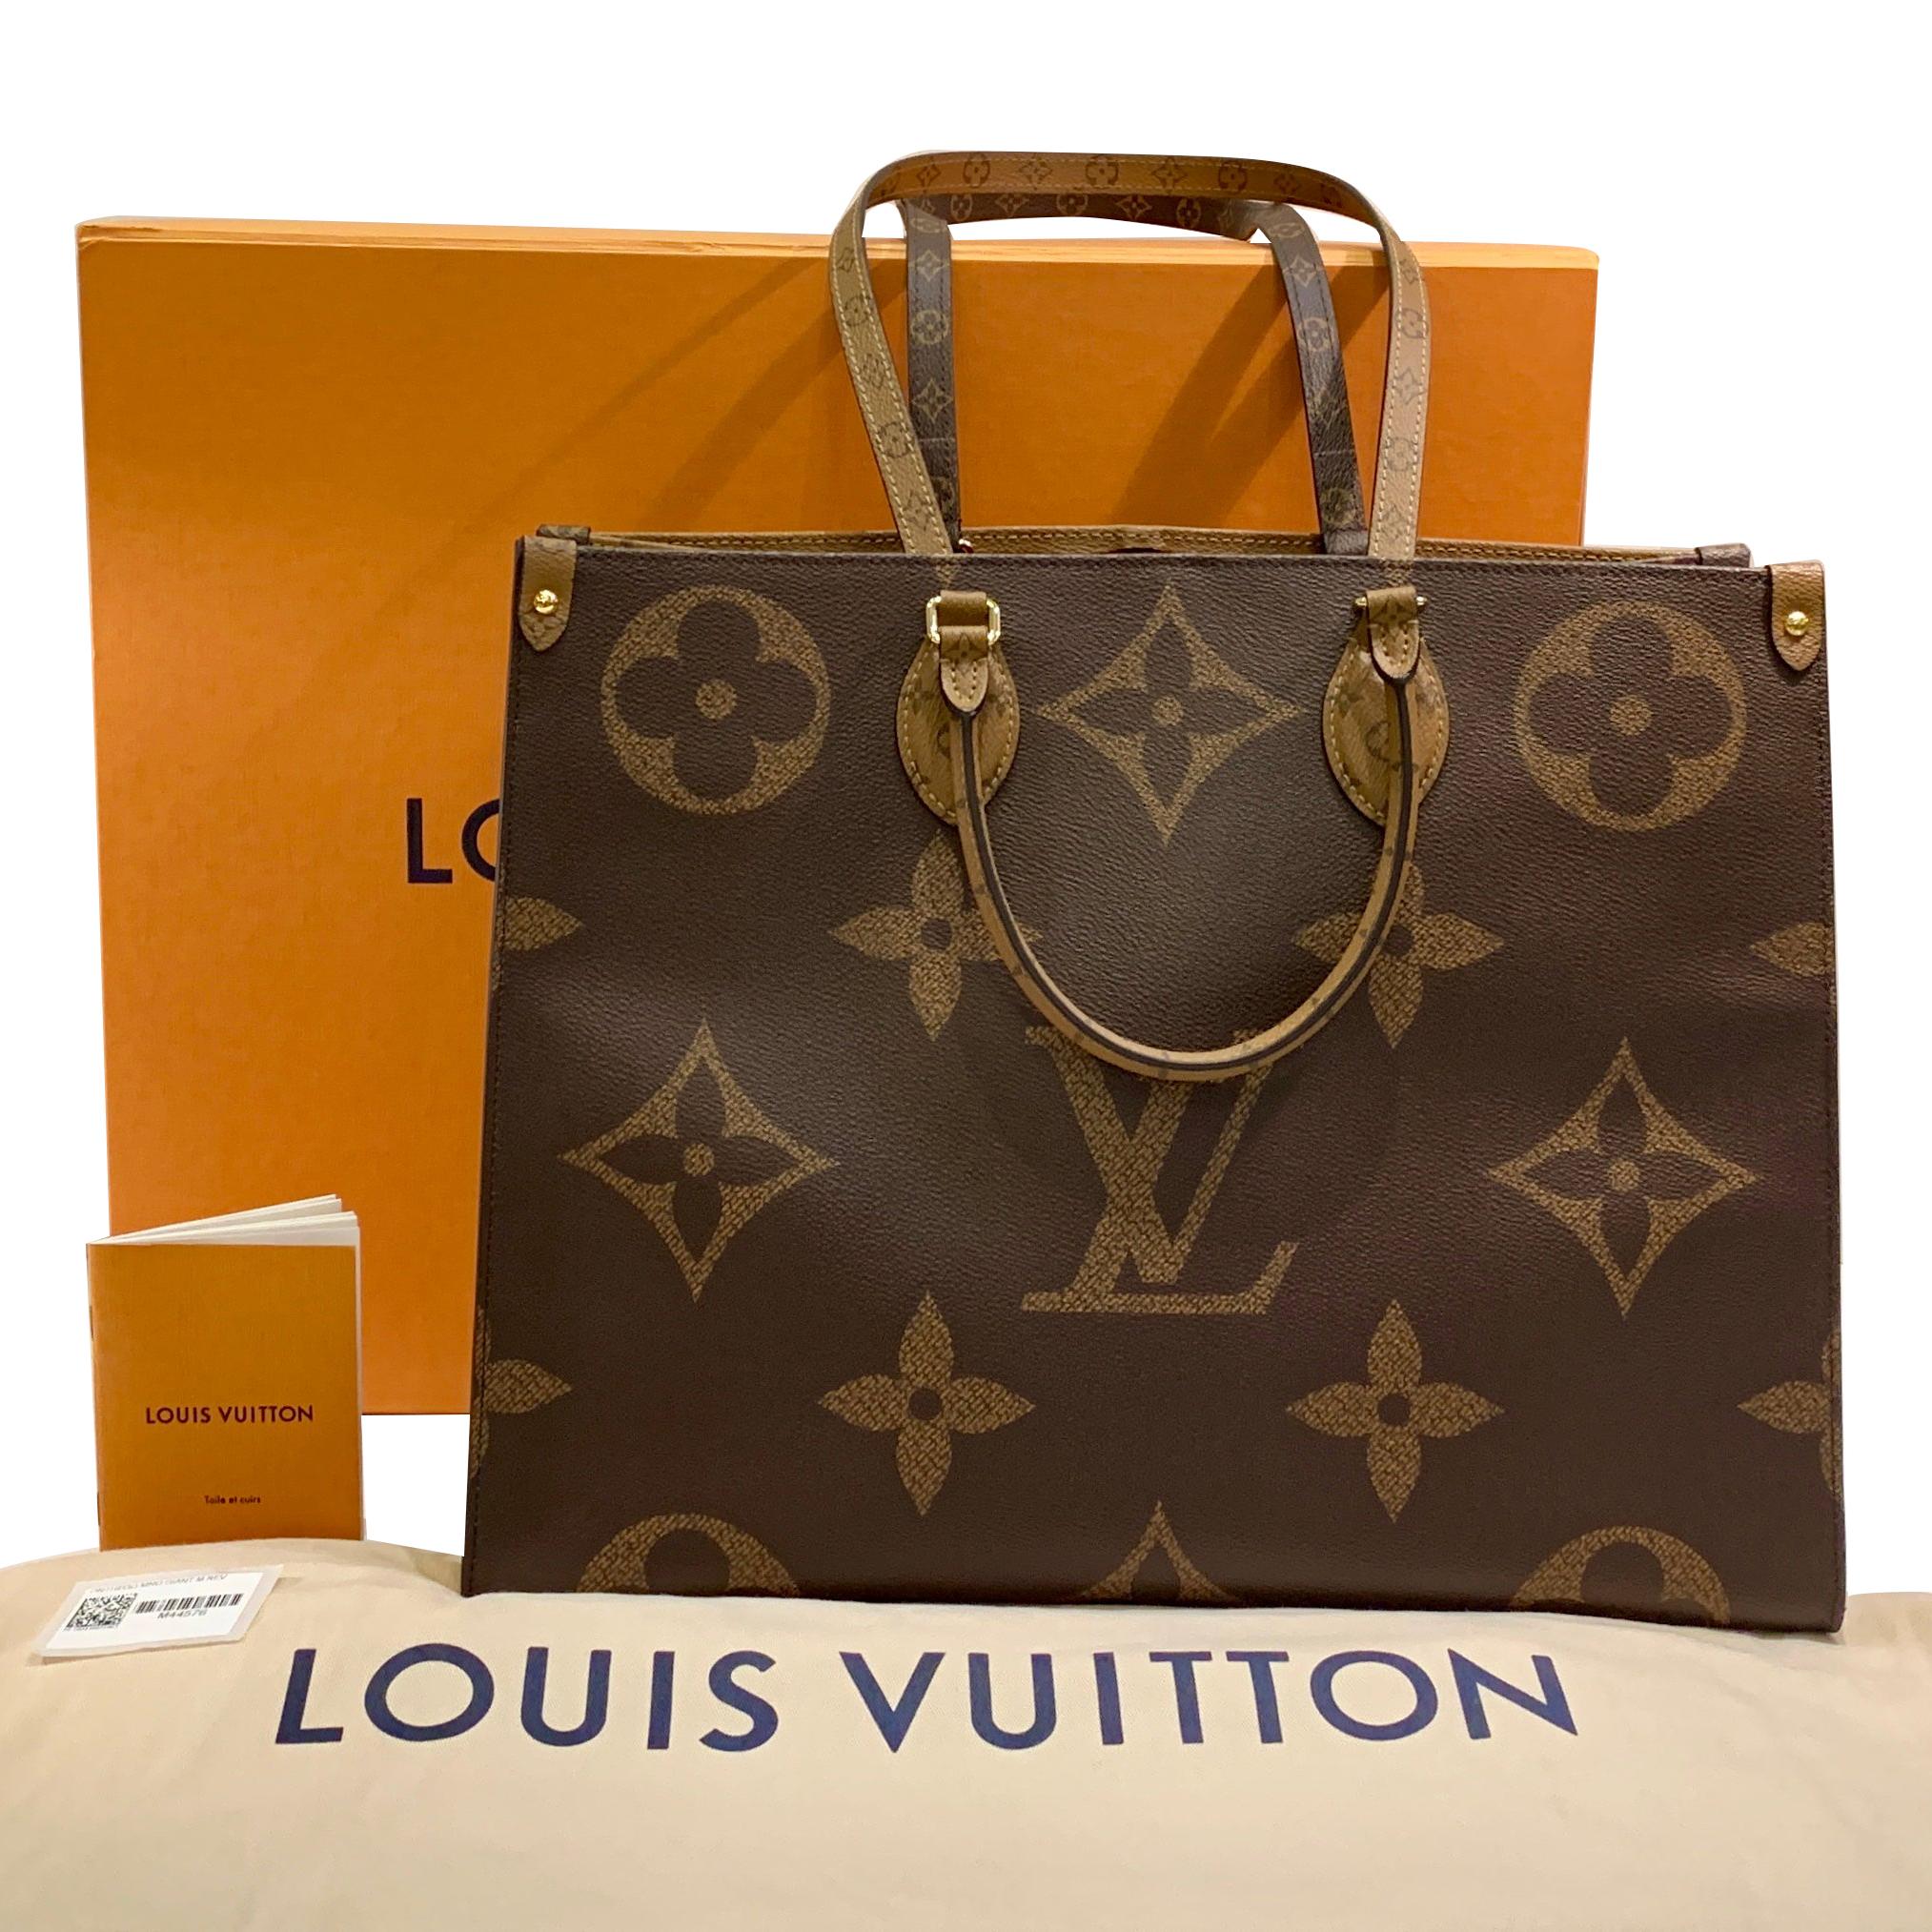 New Sold Out Louis Vuitton ONTHEGO Monogram Giant Canvas Tote Bag Summer 2019